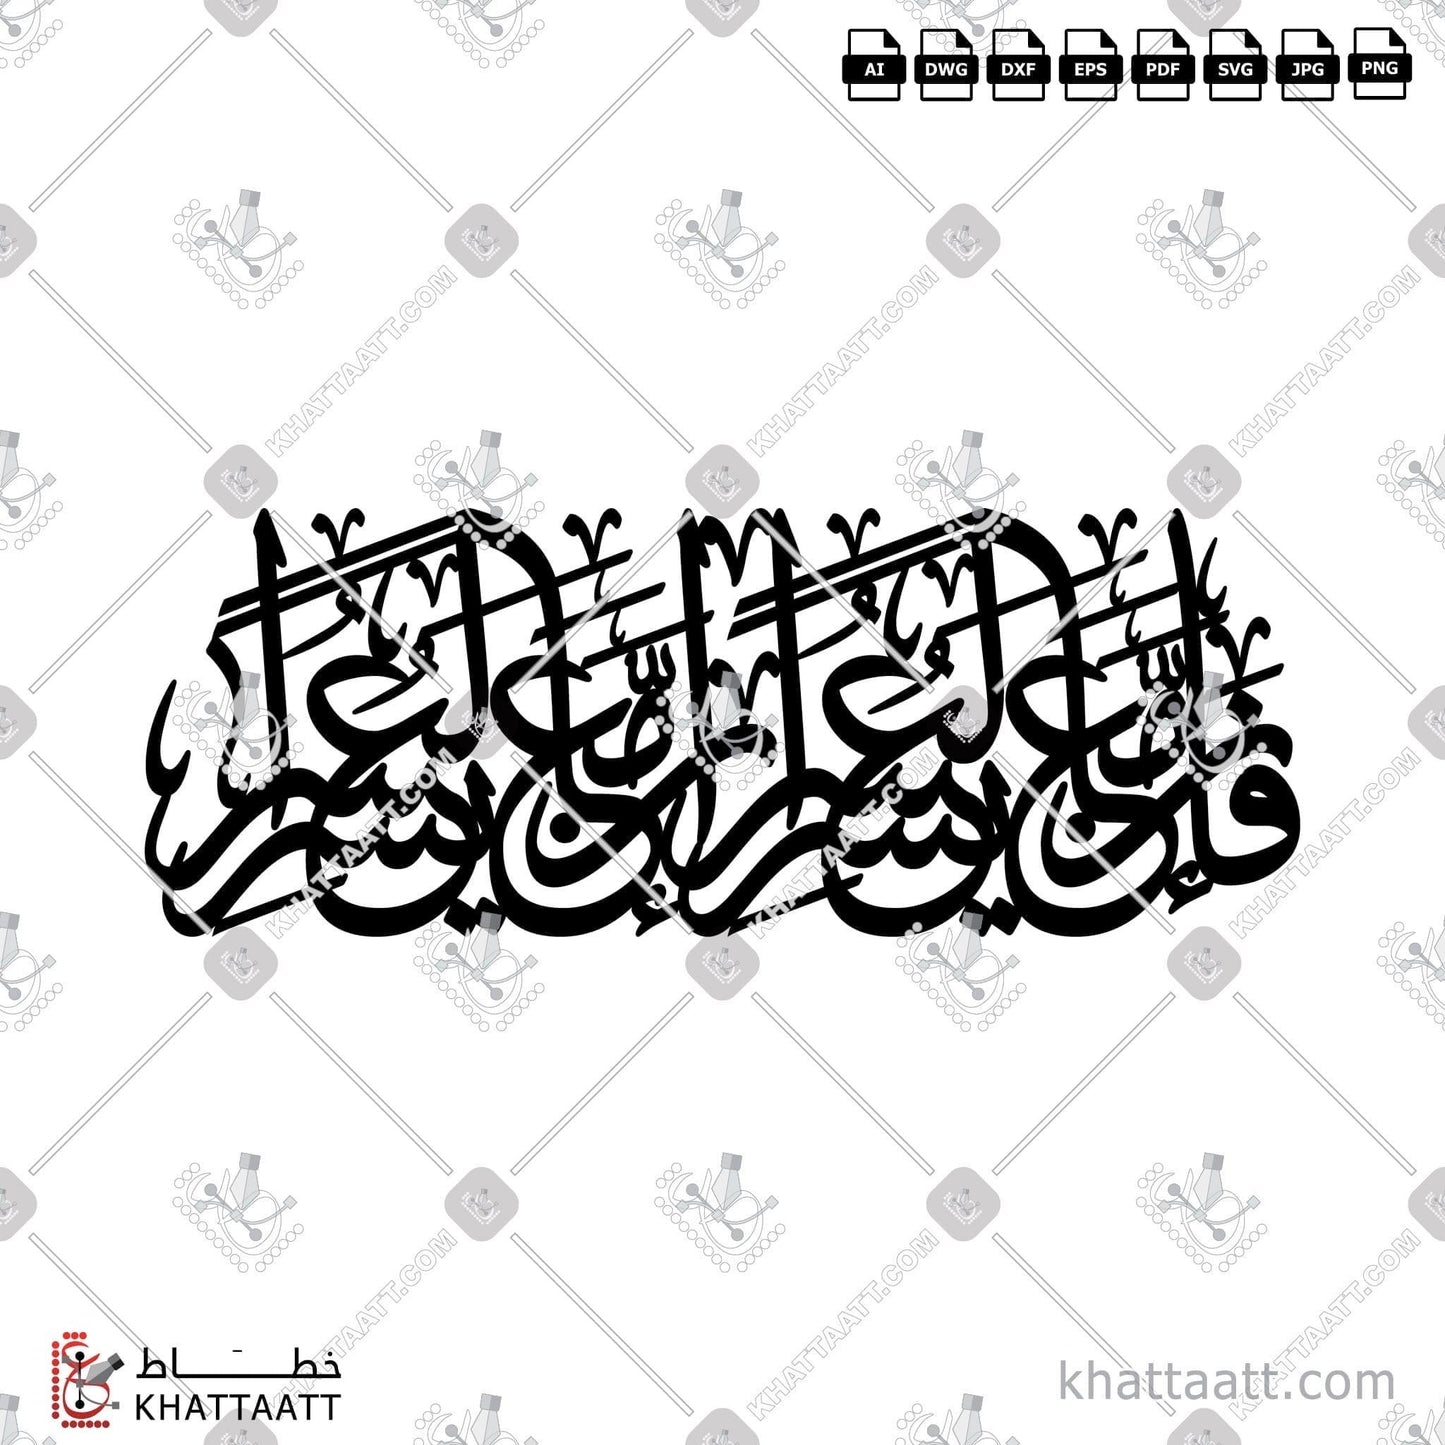 Download Arabic Calligraphy of فإن مع العسر يسرا إن مع العسر يسرا in Thuluth - خط الثلث in vector and .png